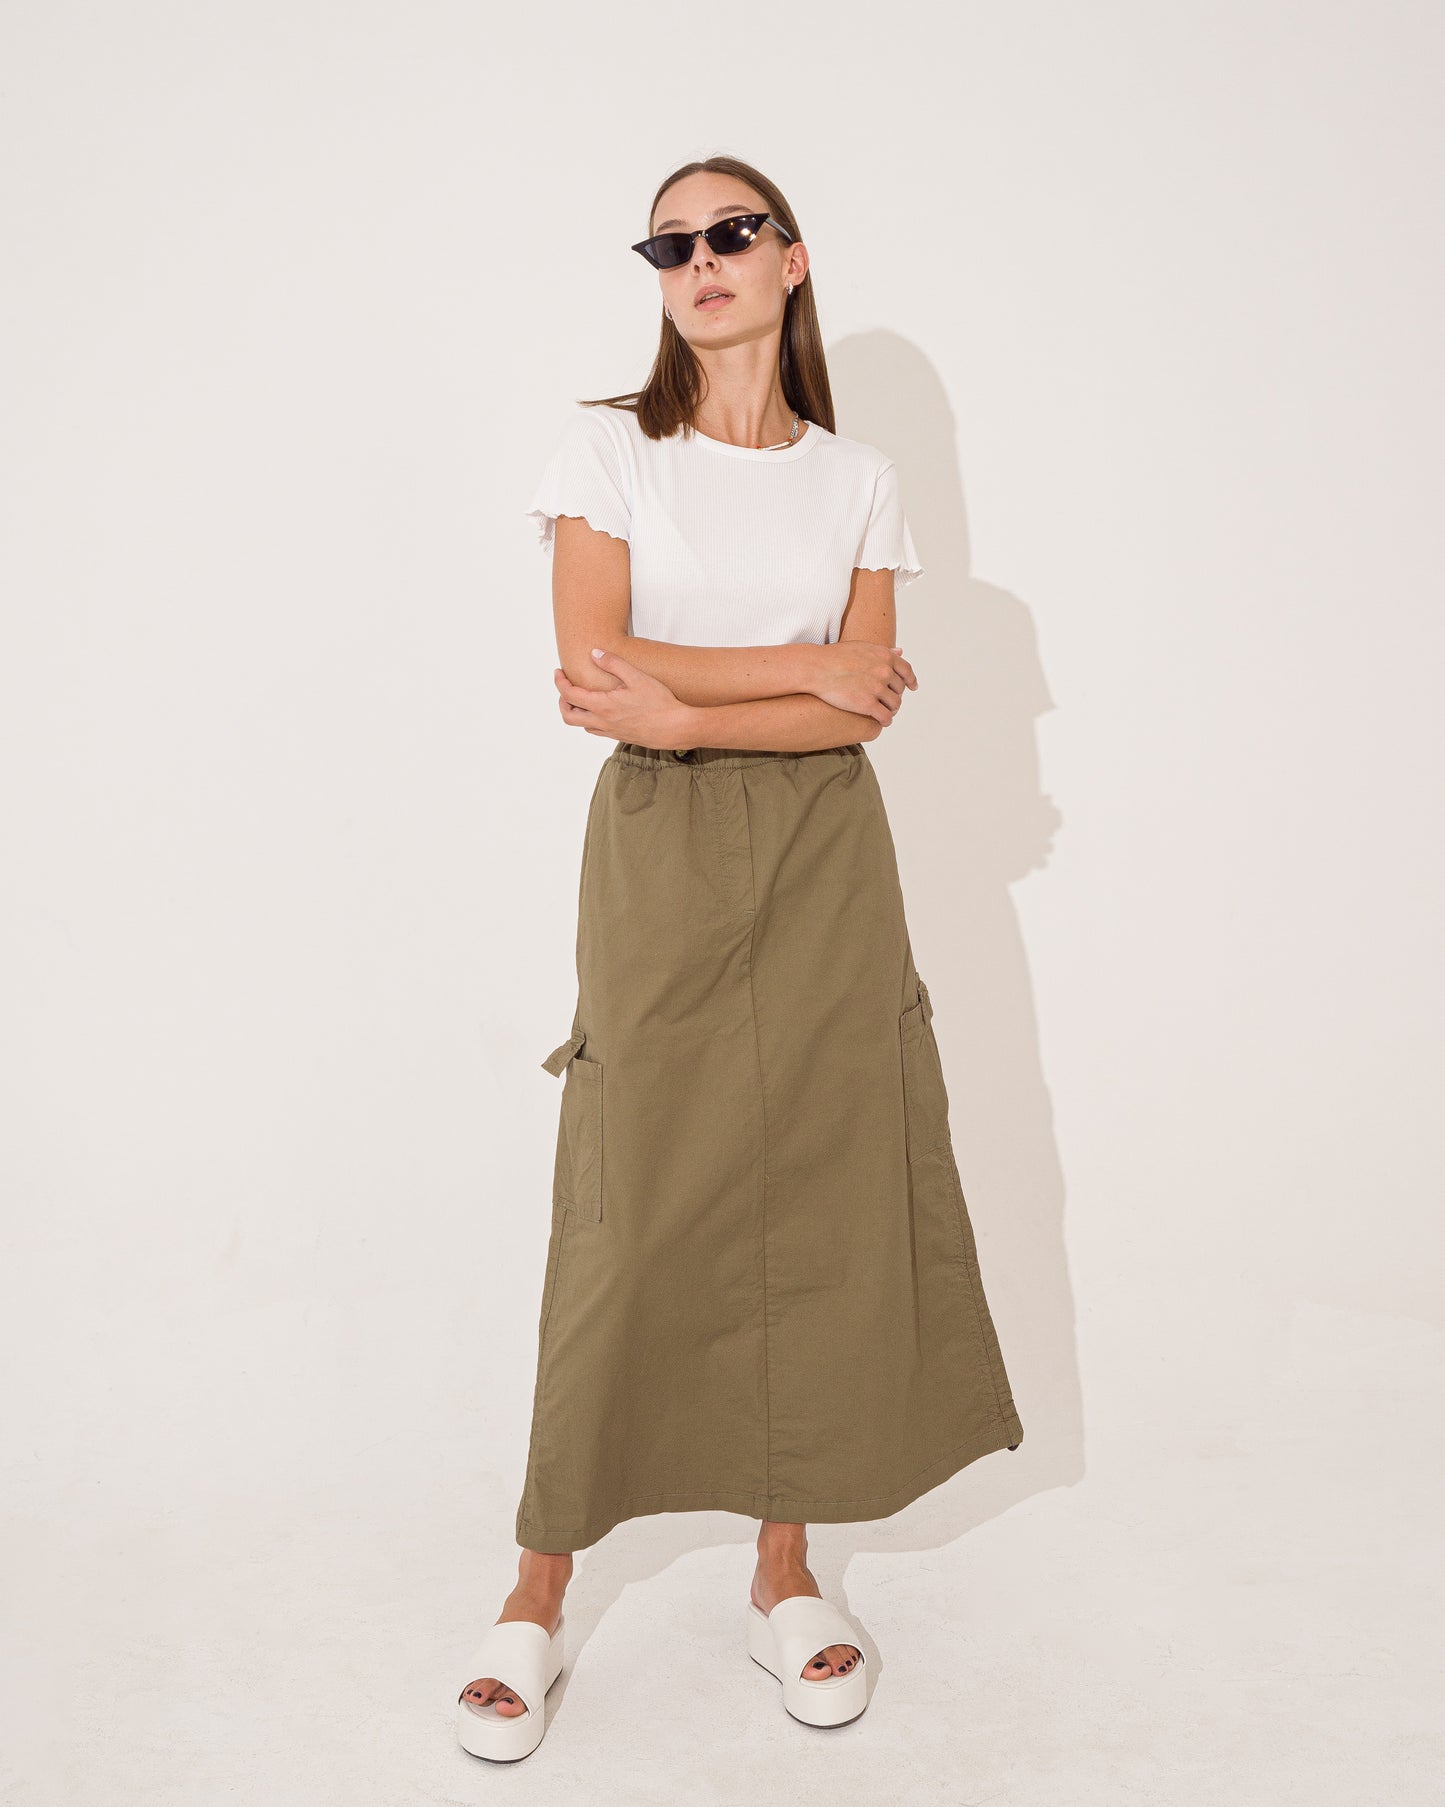 MIDI LENGHT GAGARDINE SKIRT WITH SIDE STRAP